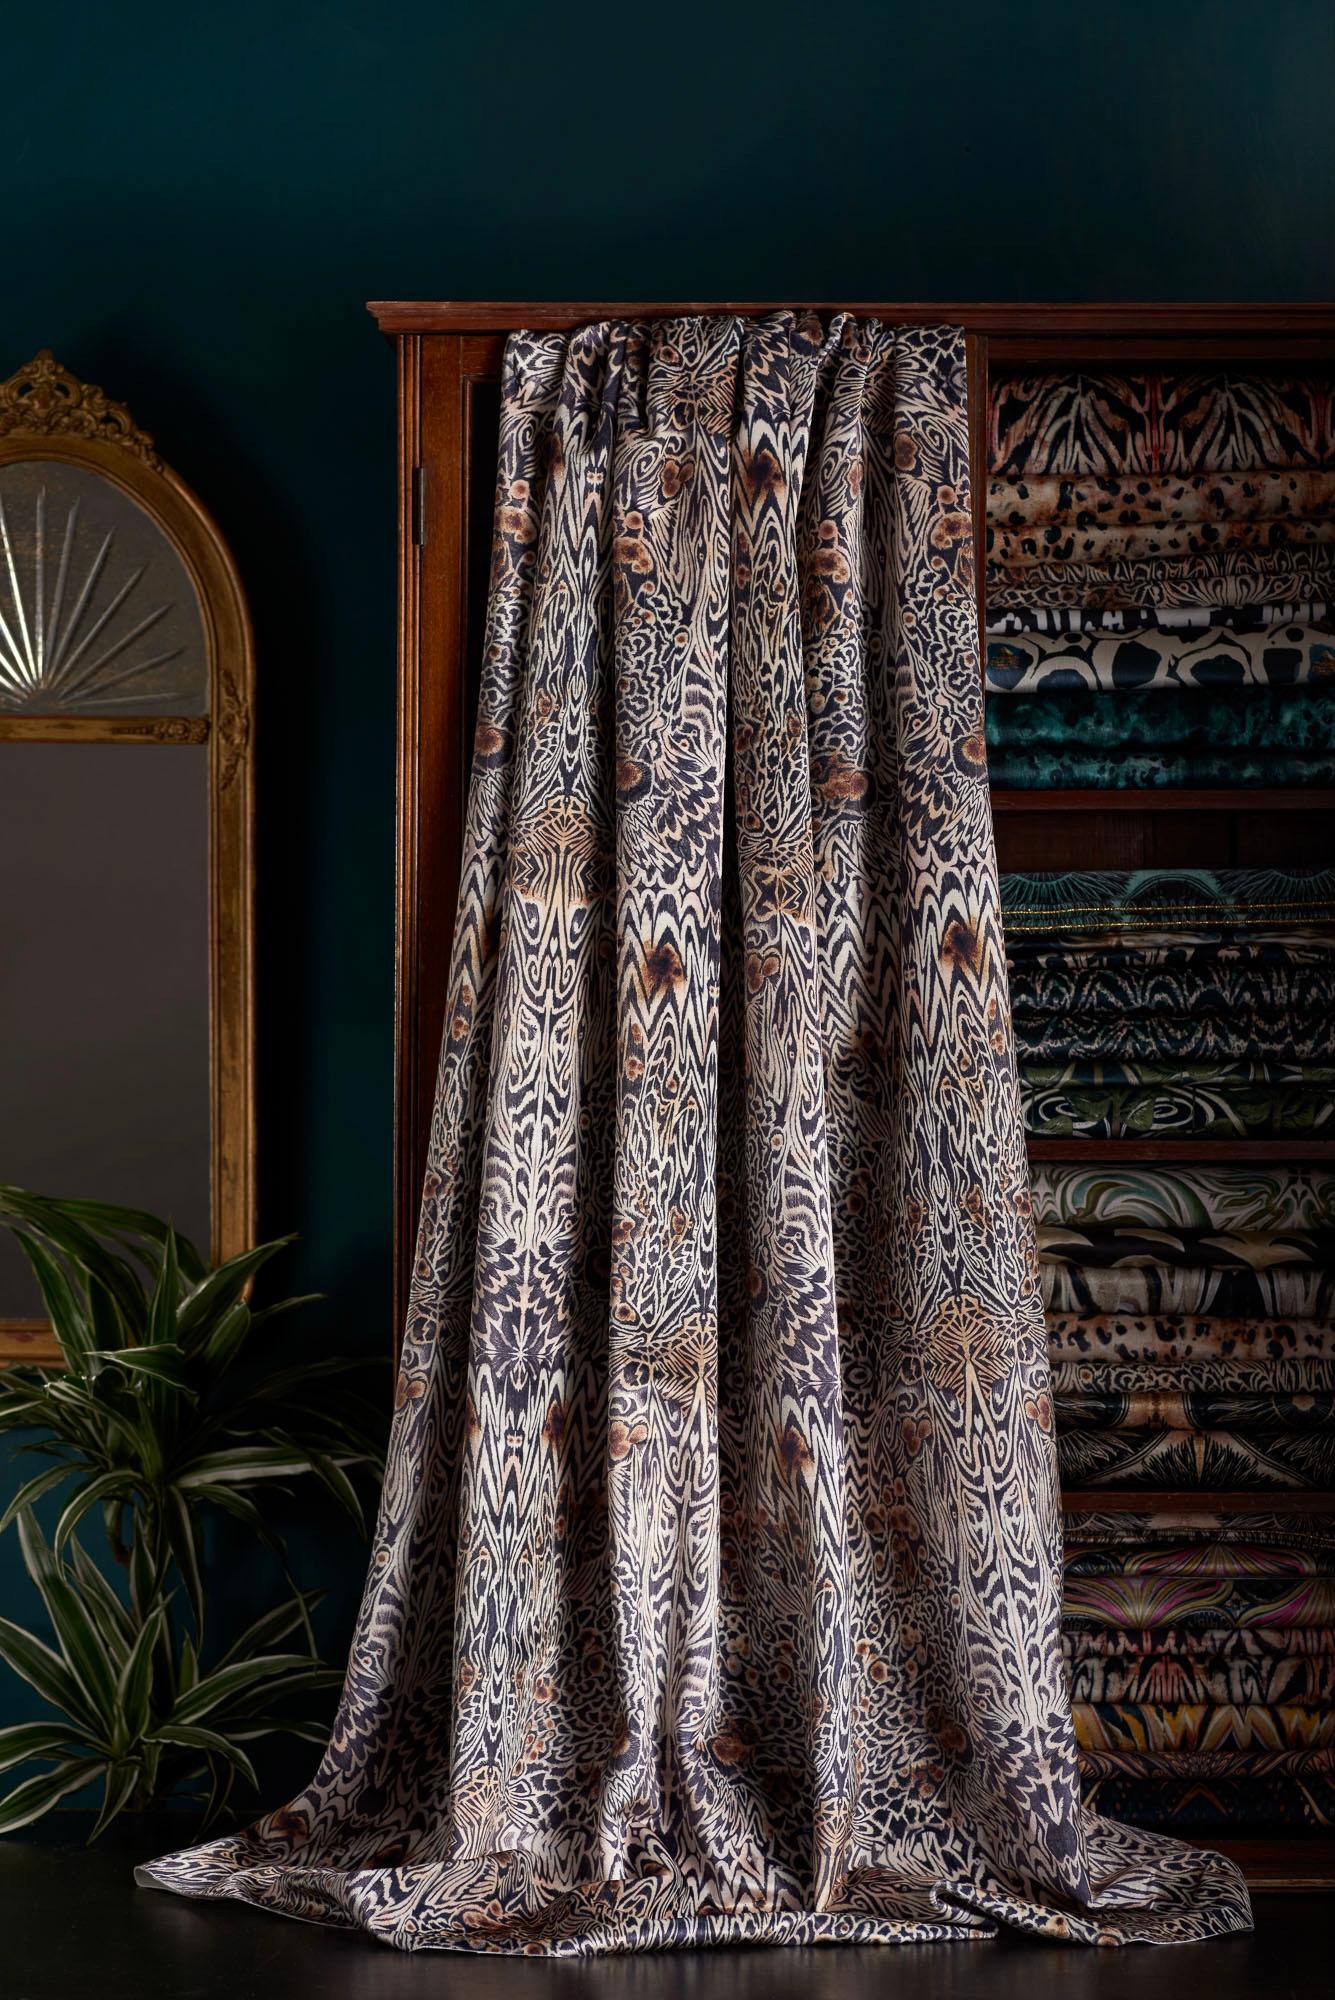 Vespertine, our new leopard style print, with 1920’s butterfly undertones. Tones of black, coffee and nude play with soft pinks in this pretty and versatile design.

This velvet is thick and luxurious, with a strong straight woven backing. It is